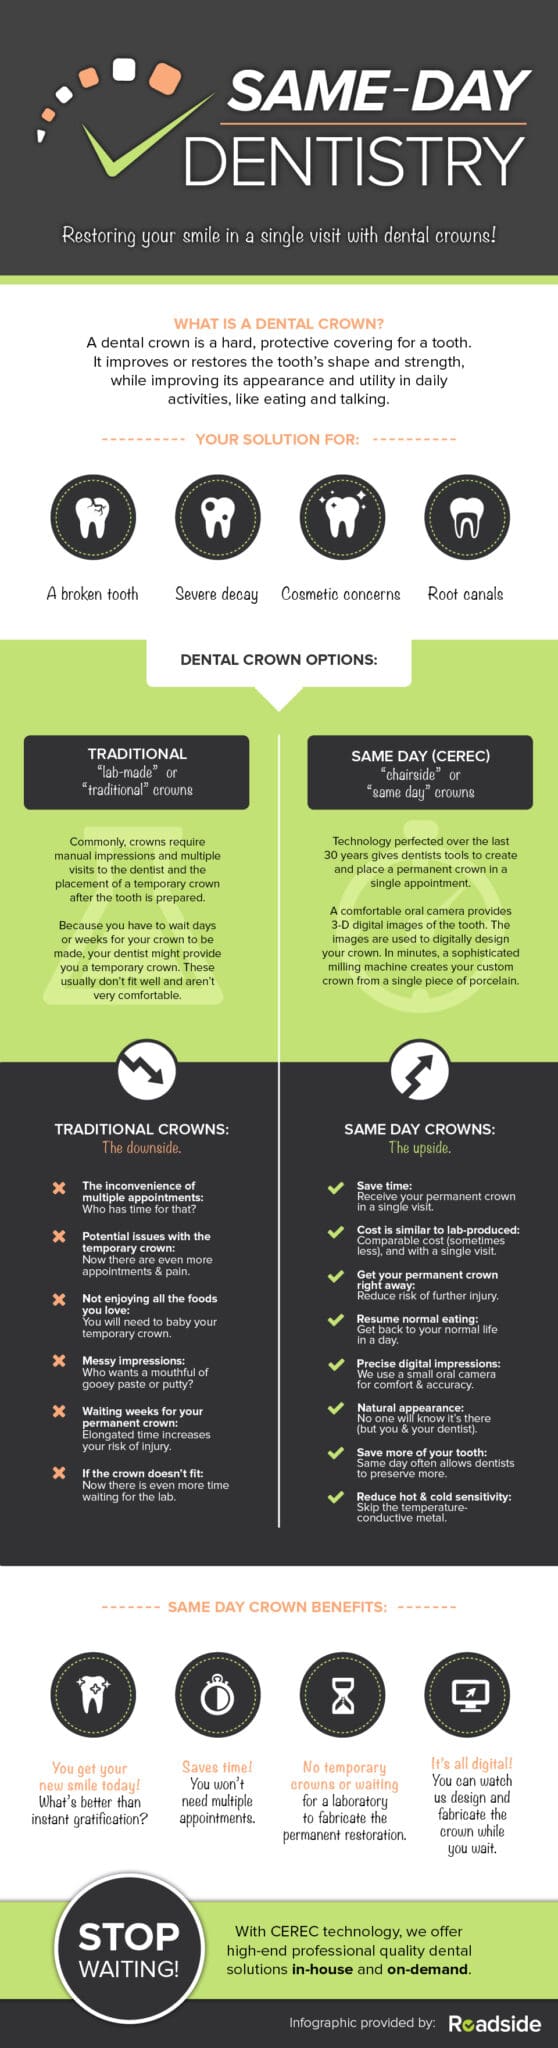 Same Day Dentistry infographic